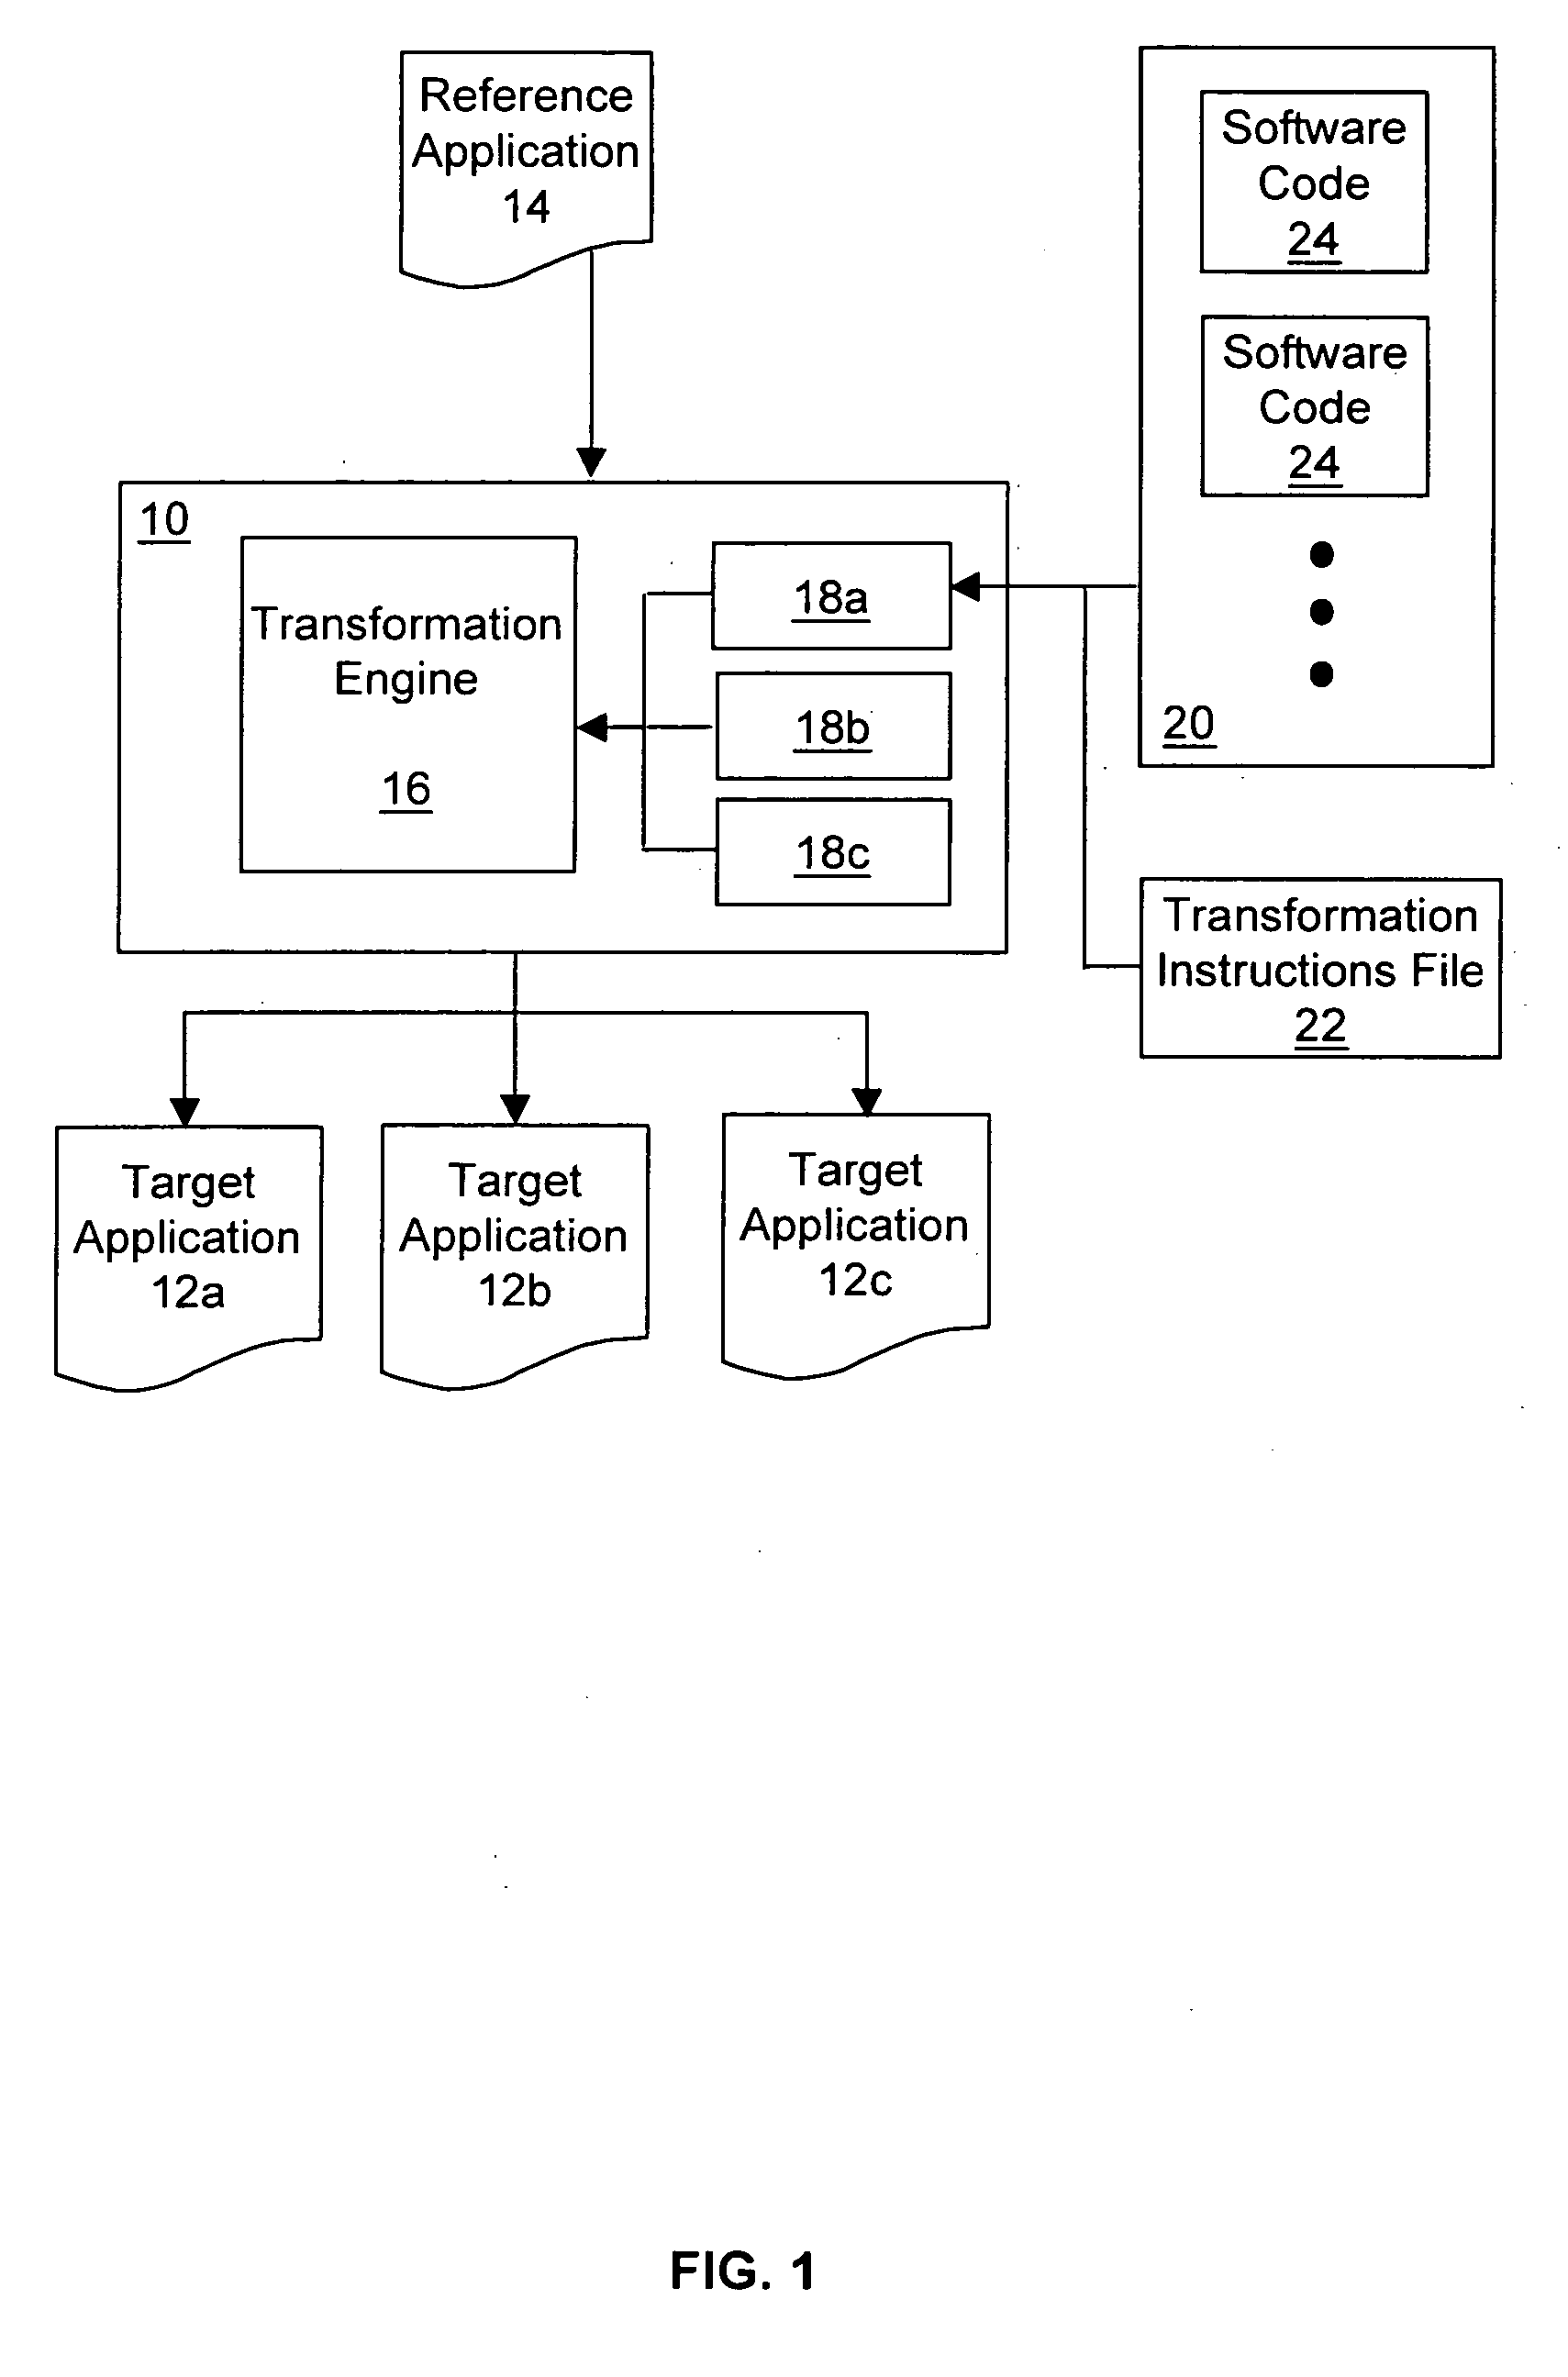 System and method of generating applications for mobile devices